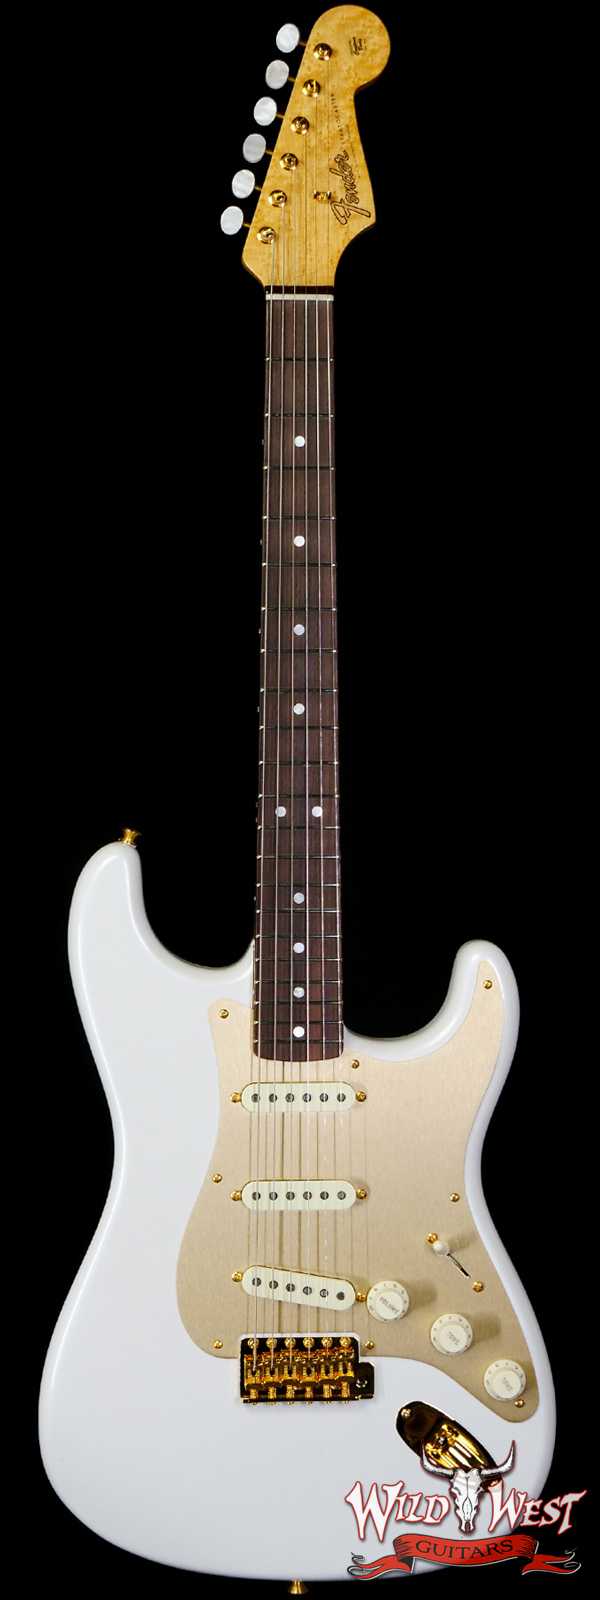 Fender Custom Shop Limited Edition 75th Anniversary Stratocaster 5A Birdseye Maple Neck Rosewood Fingerboard NOS Diamond White Pearl